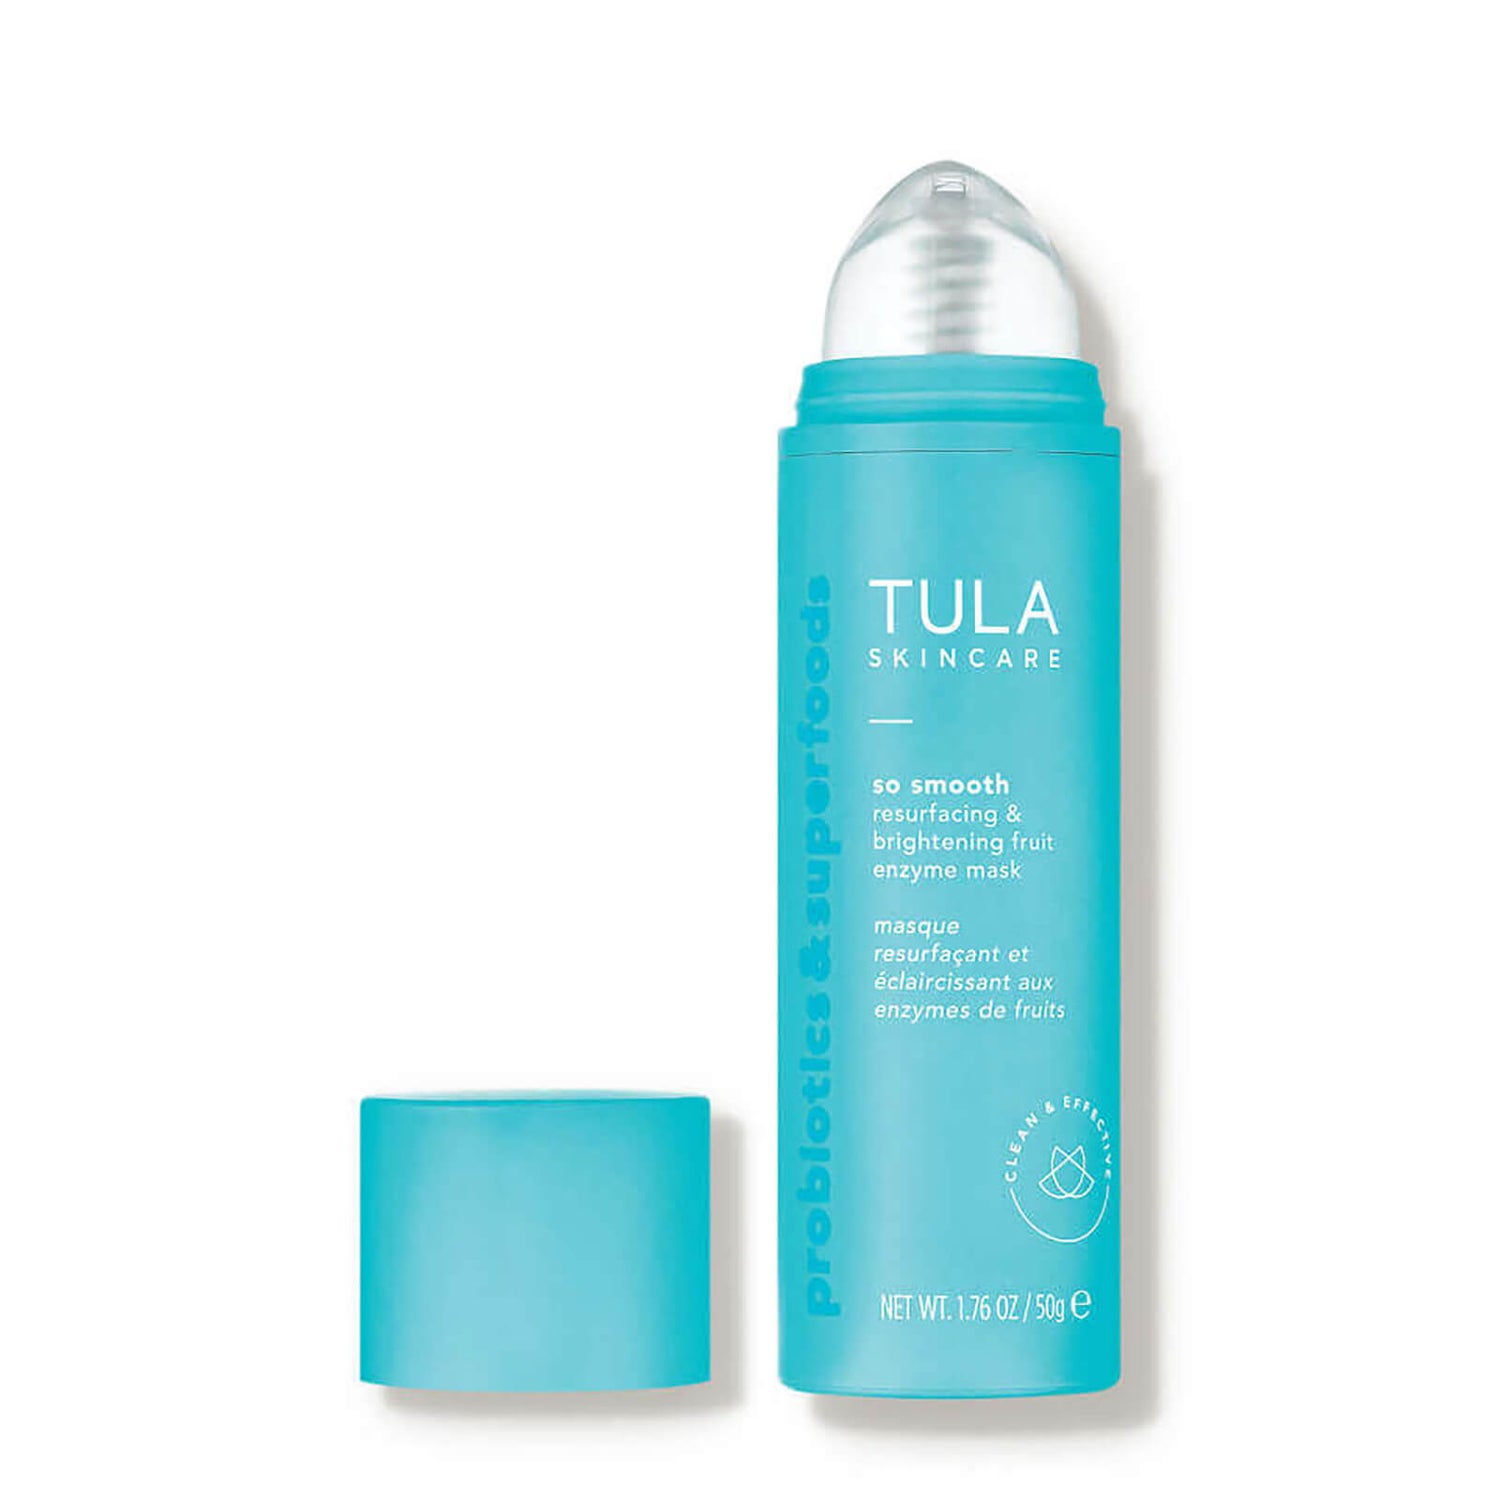 TULA Skincare So Smooth Re-Surfacing Brightening Enzyme Mask (1.76 oz.)